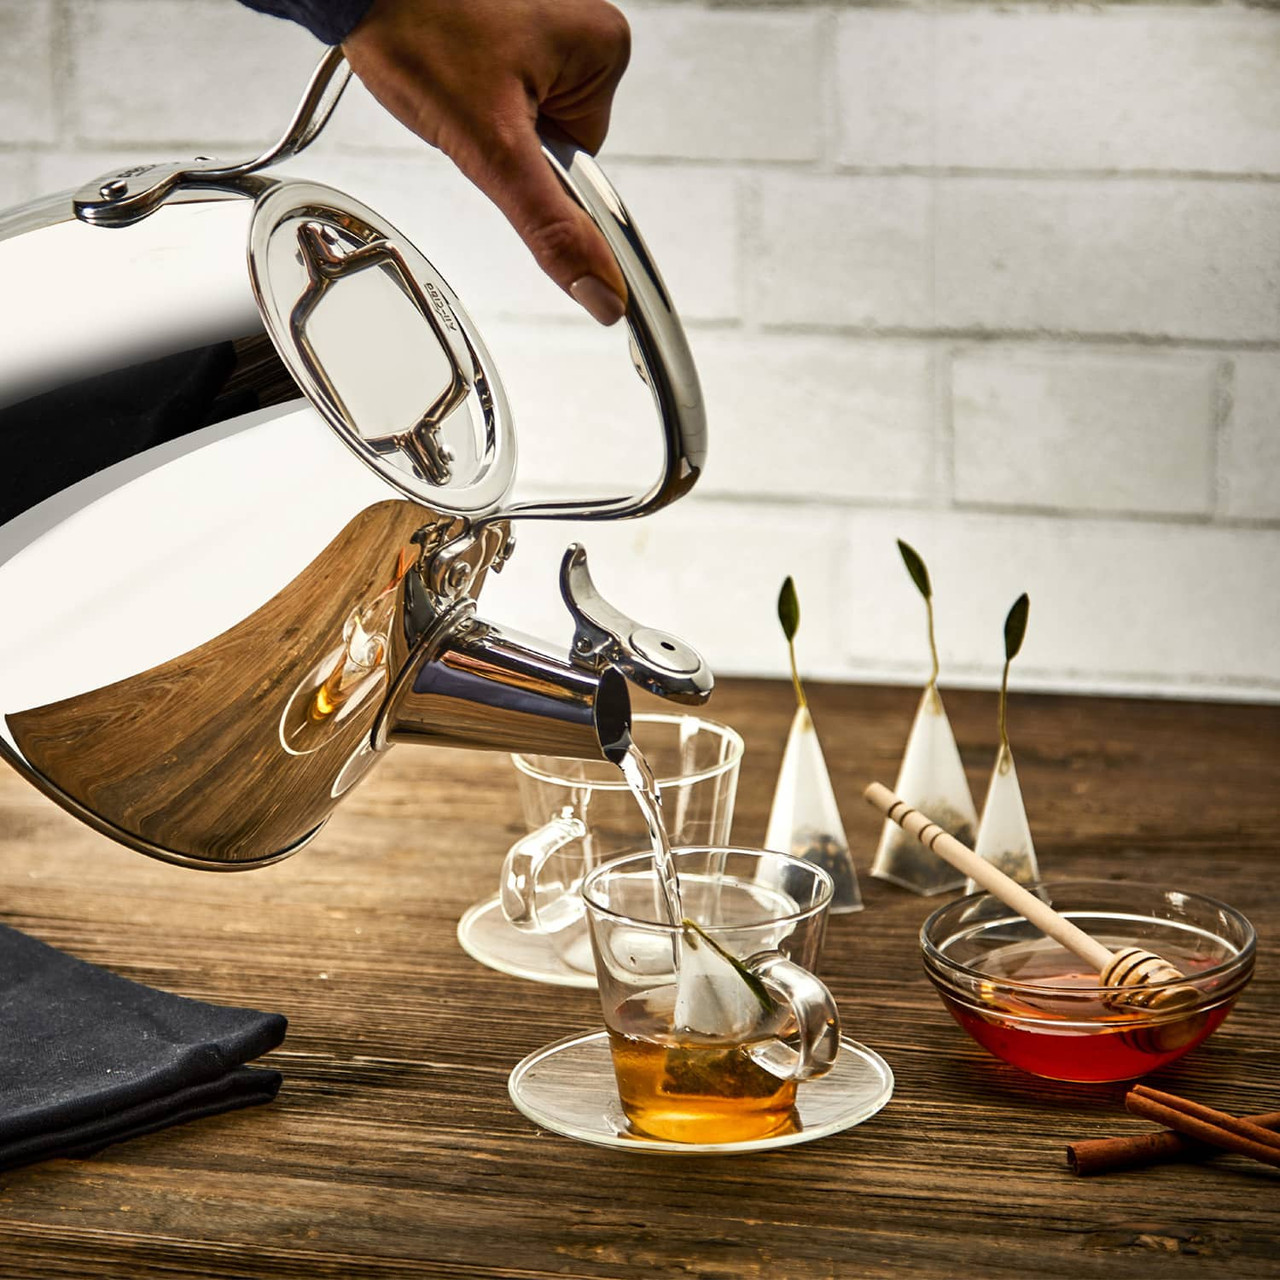 https://cdn11.bigcommerce.com/s-hccytny0od/images/stencil/1280x1280/products/4021/14810/all-clad-stainless-steel-tea-kettle-4__59985.1620122801.jpg?c=2?imbypass=on